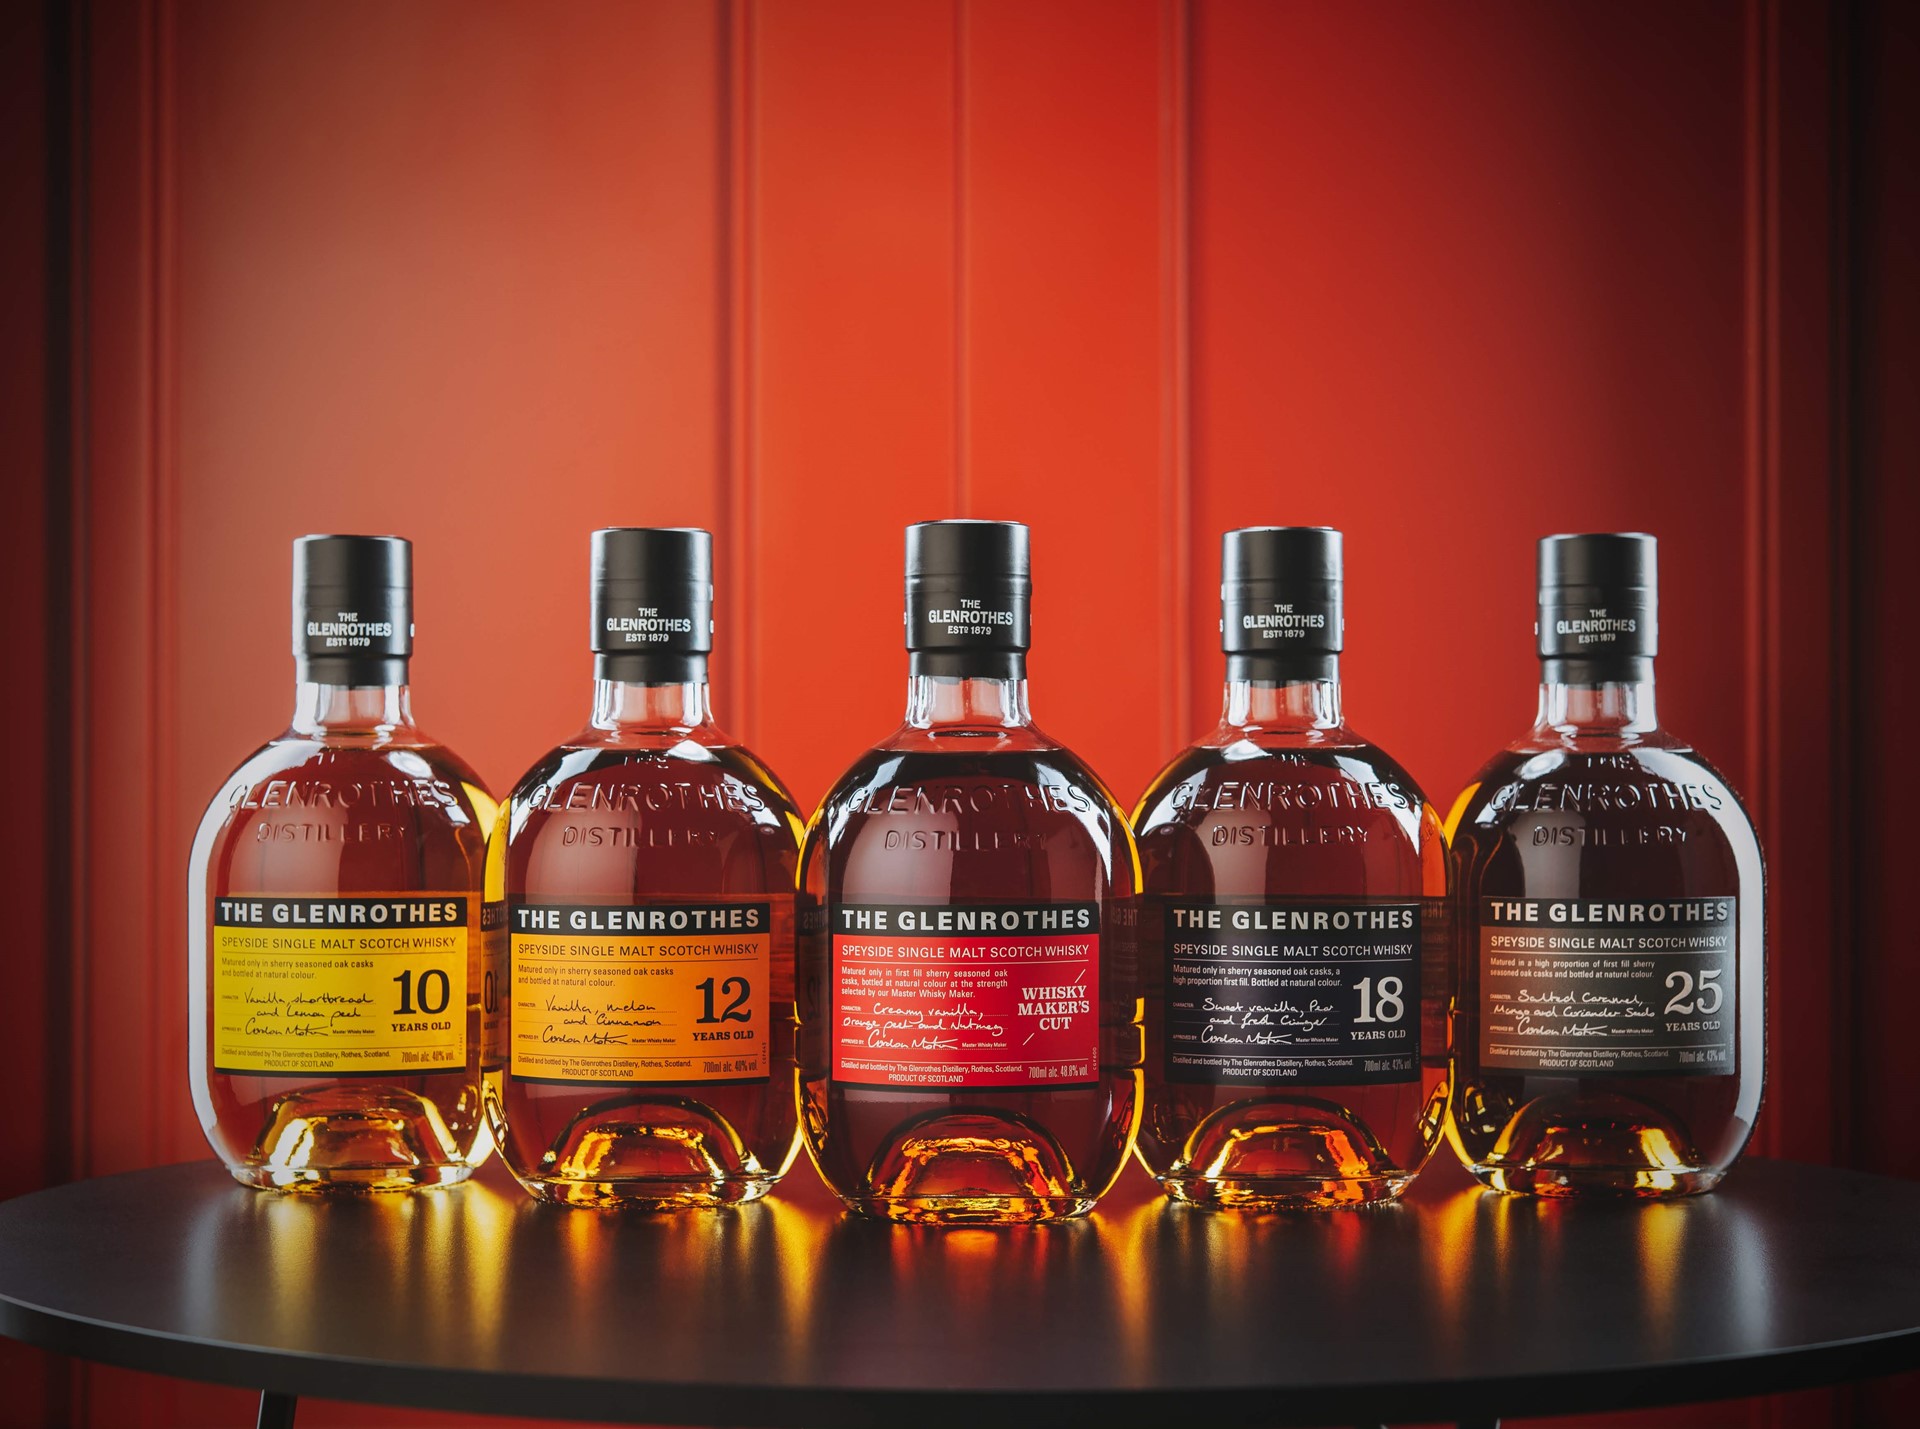 Every expression of The Glenrothes Soleo range has been matured exclusively in sherry seasoned casks